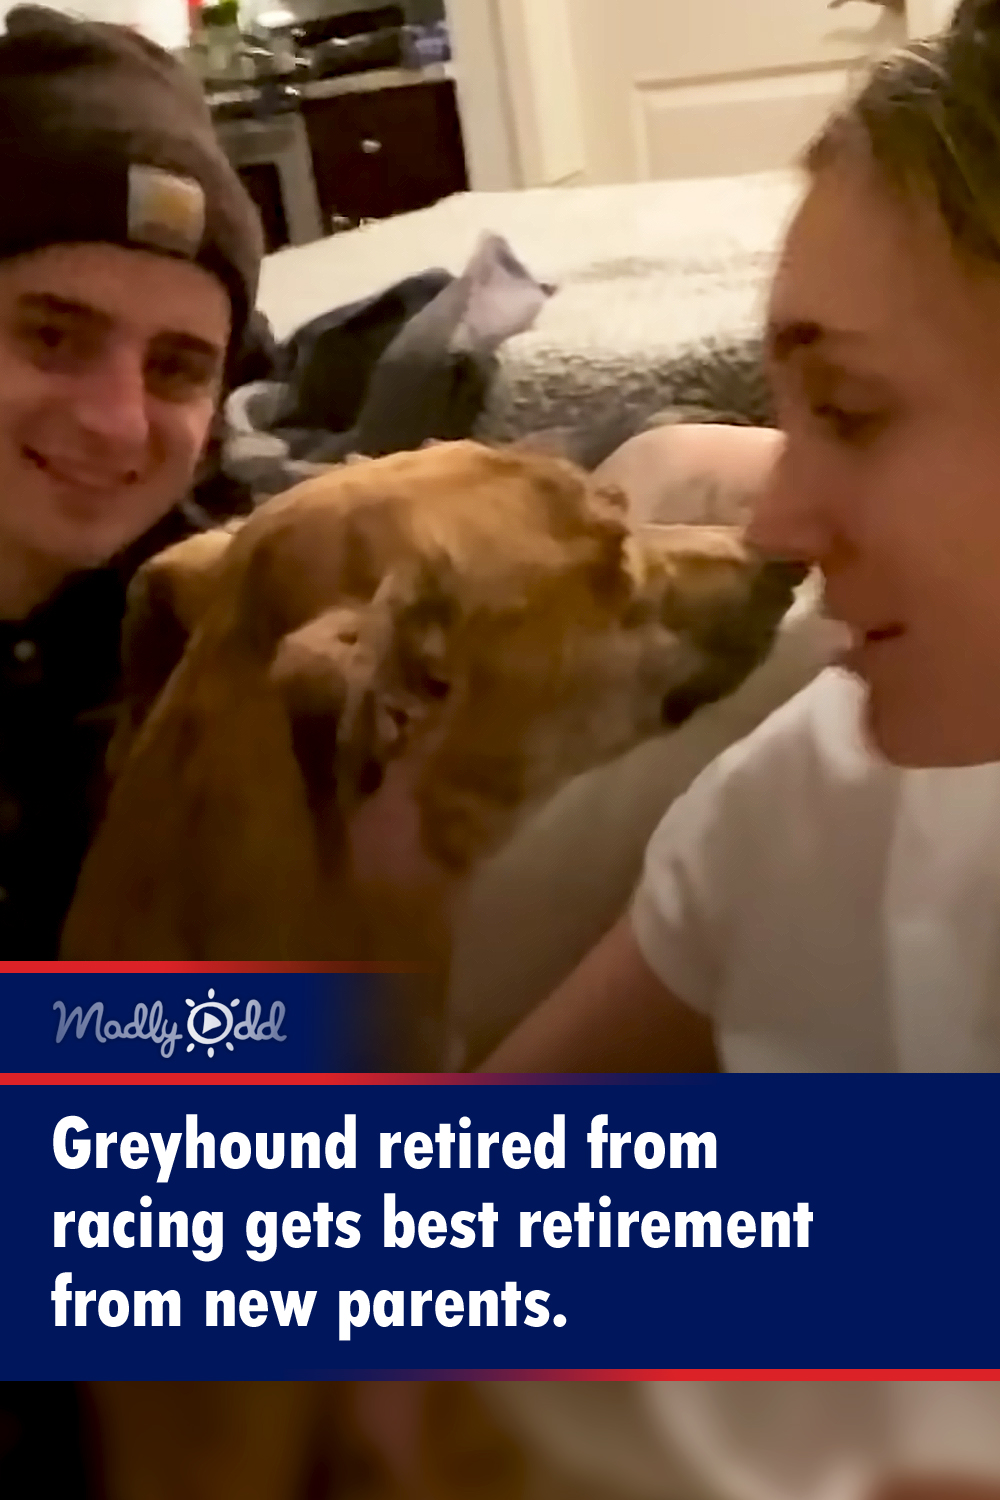 Greyhound retired from racing gets best retirement from new parents